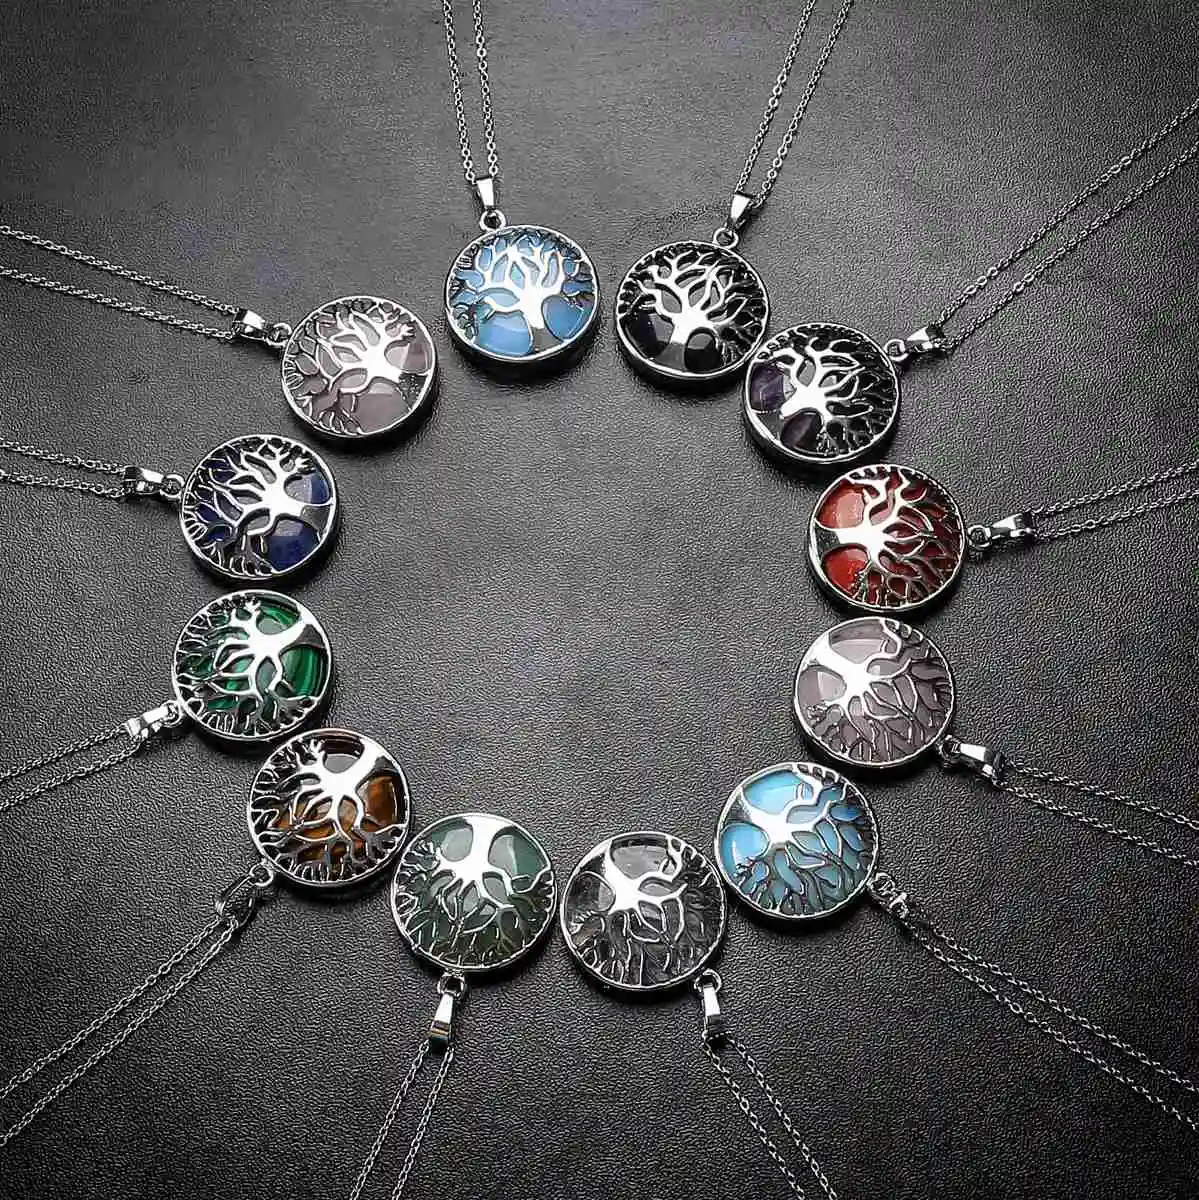 Handmade Tree of Life Healing Stone Pendant for Necklace Handmade Round Silver Alloy Gemstone Crystal Pendant Charm Jewelry